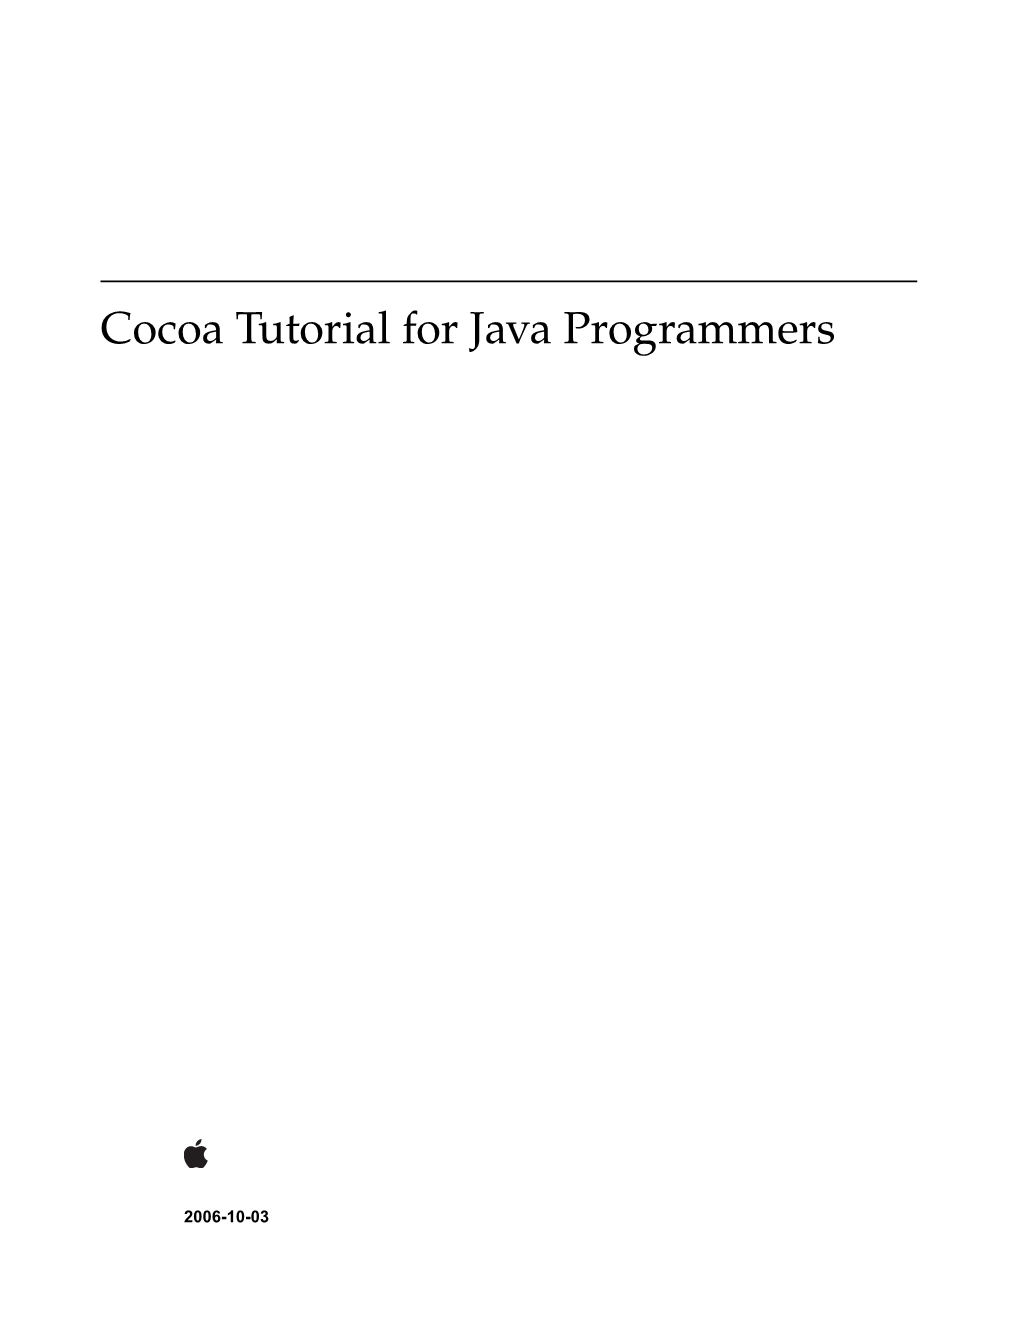 Cocoa Tutorial for Java Programmers